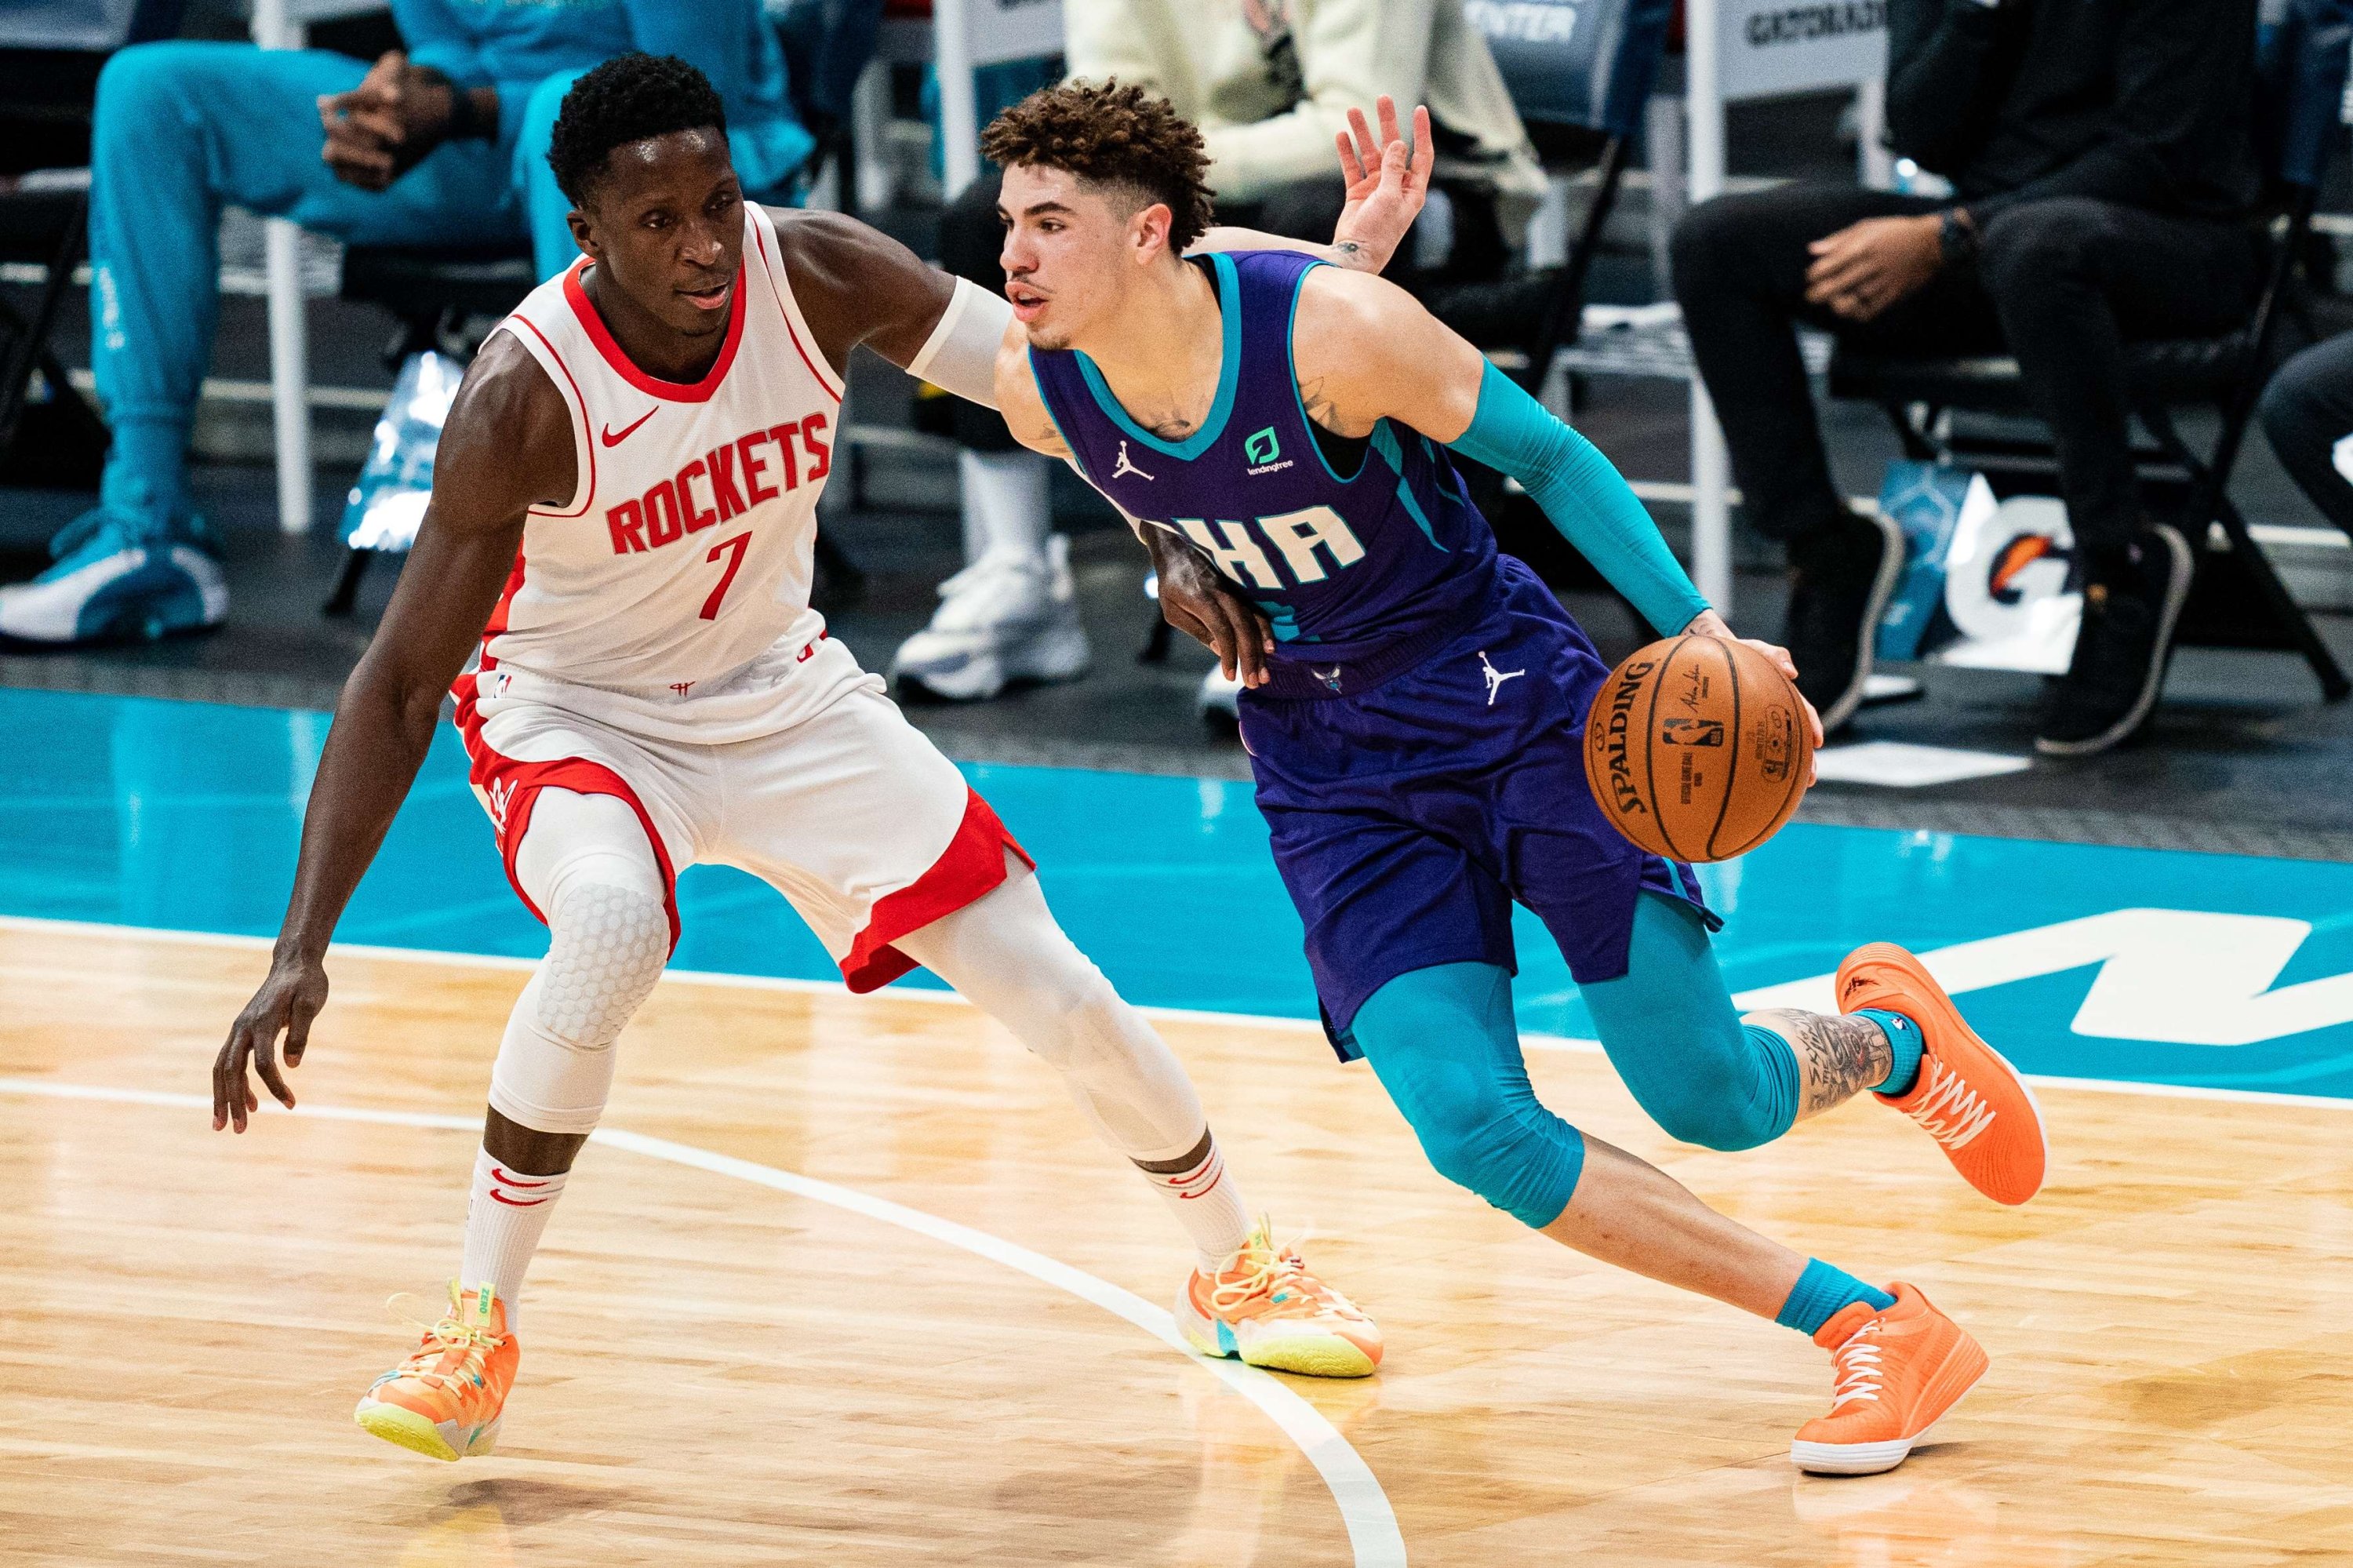 Charlotte Hornets LaMelo Ball (R) drives against Houston Rockets' Victor Oladipo (L) during their NBA match at Spectrum Center, Charlotte, North Carolina, U.S., Feb. 8, 2021. (AFP Photo)